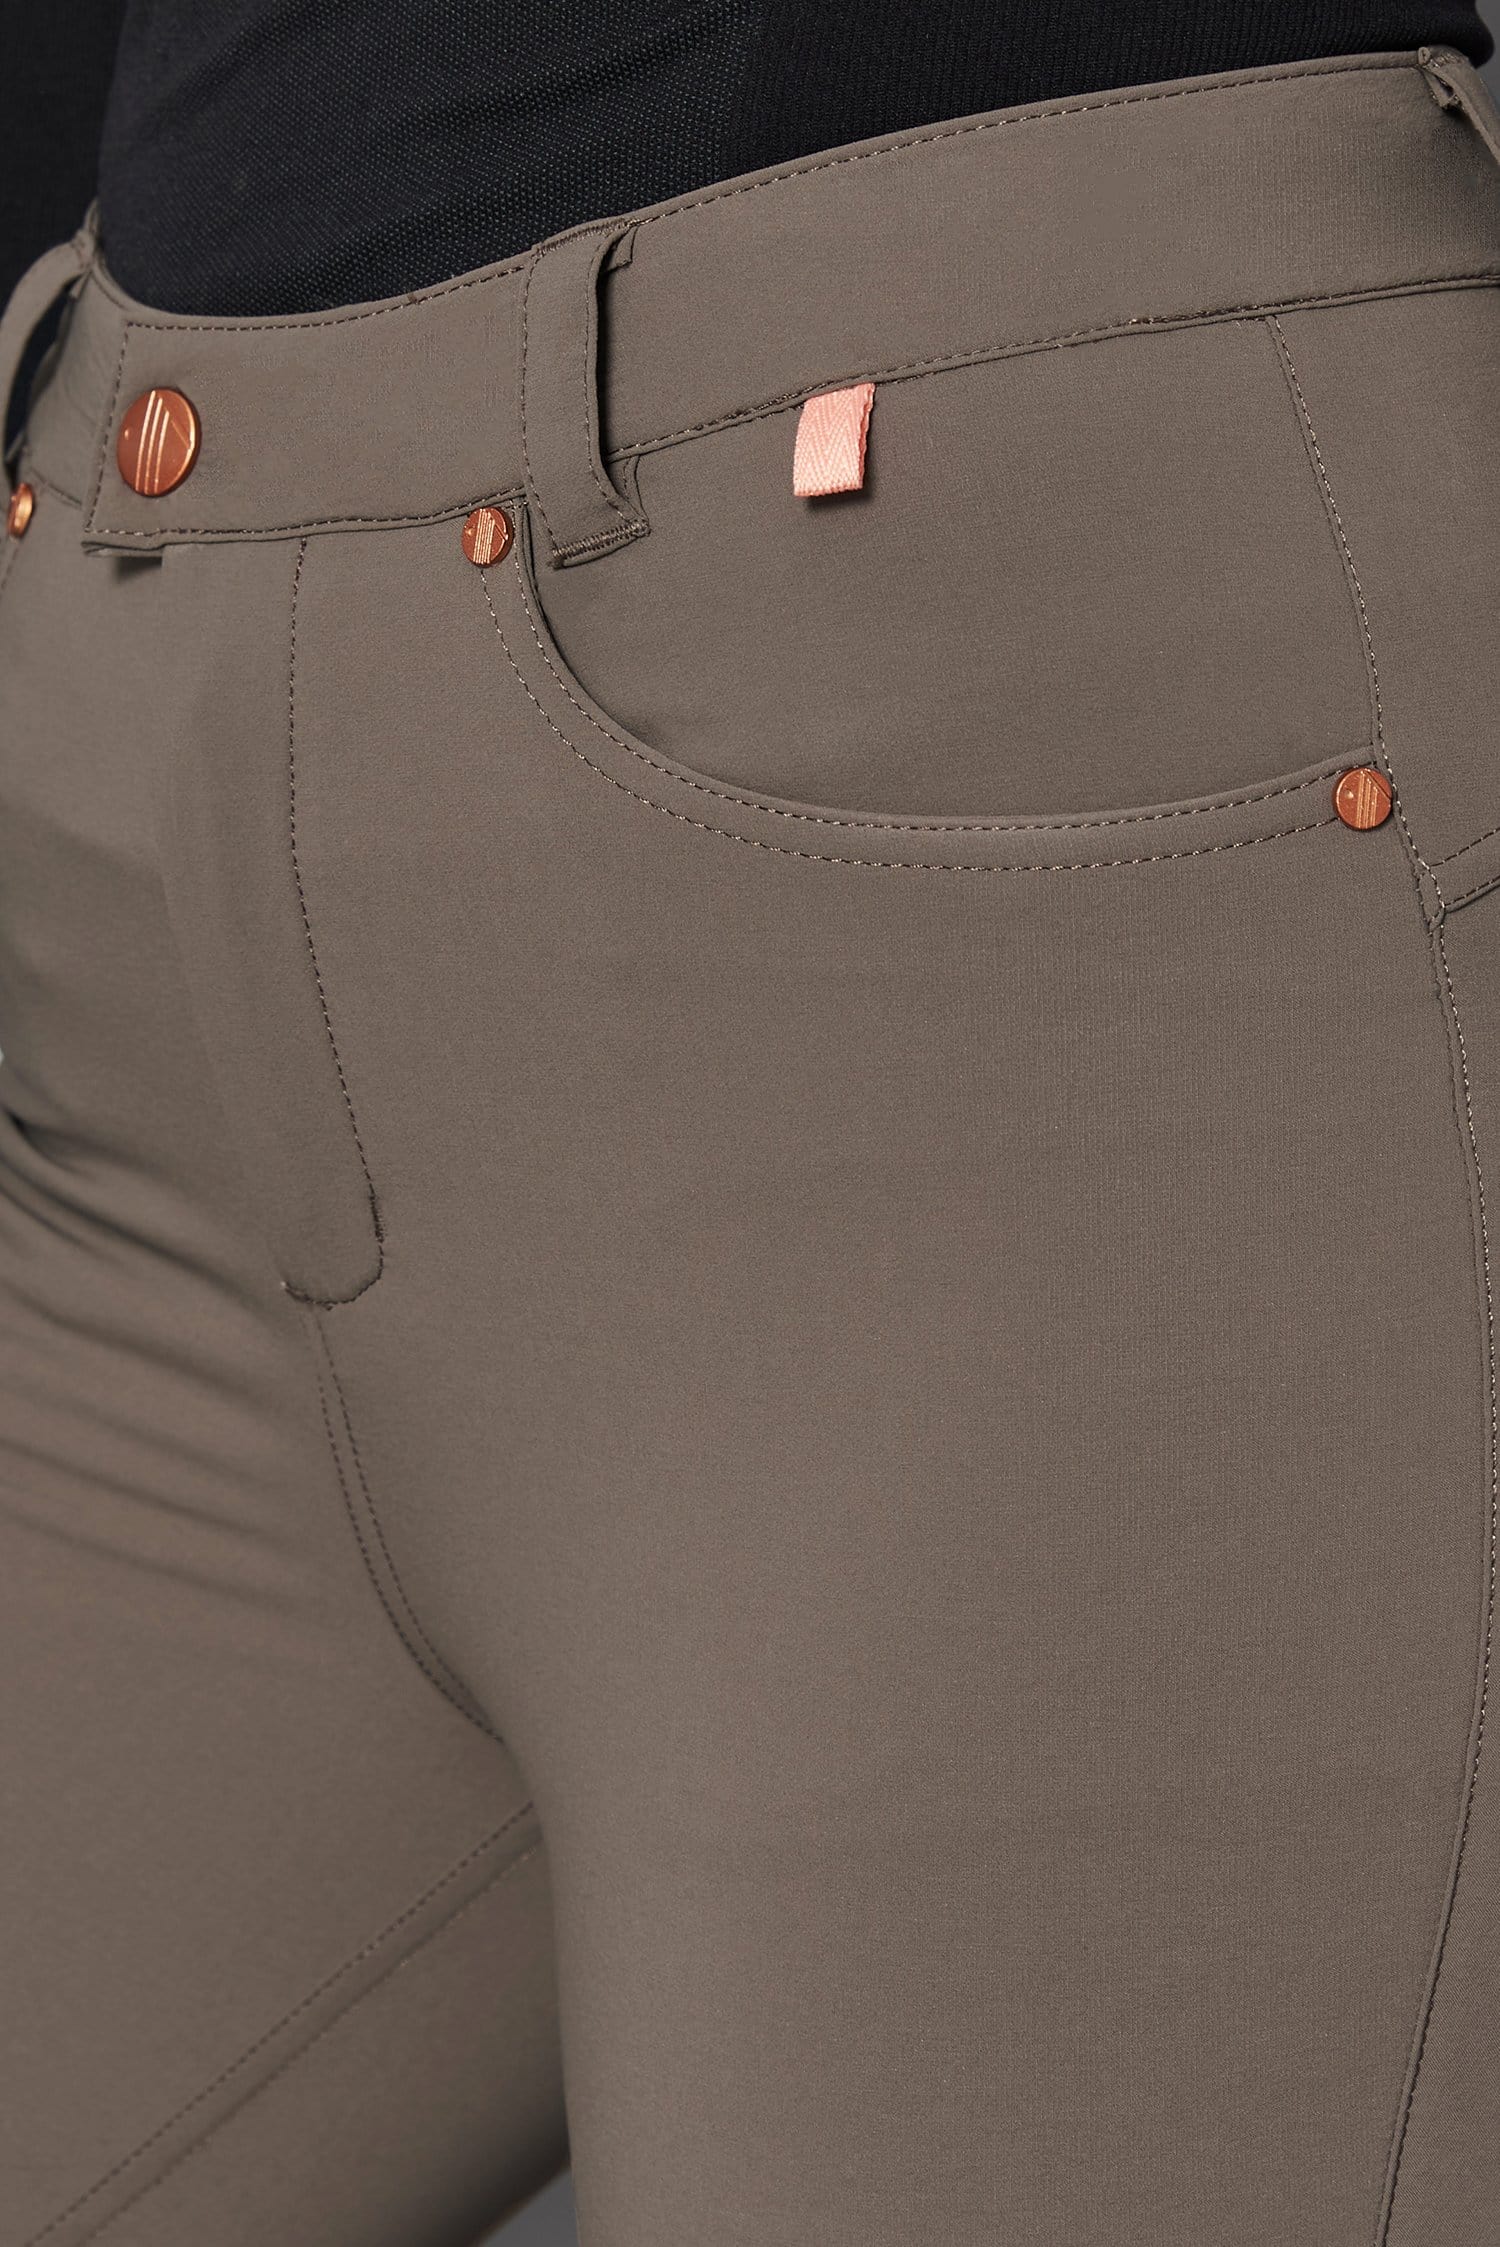 MAX Stretch Skinny Outdoor Trousers - Sand - ACAI Activewear